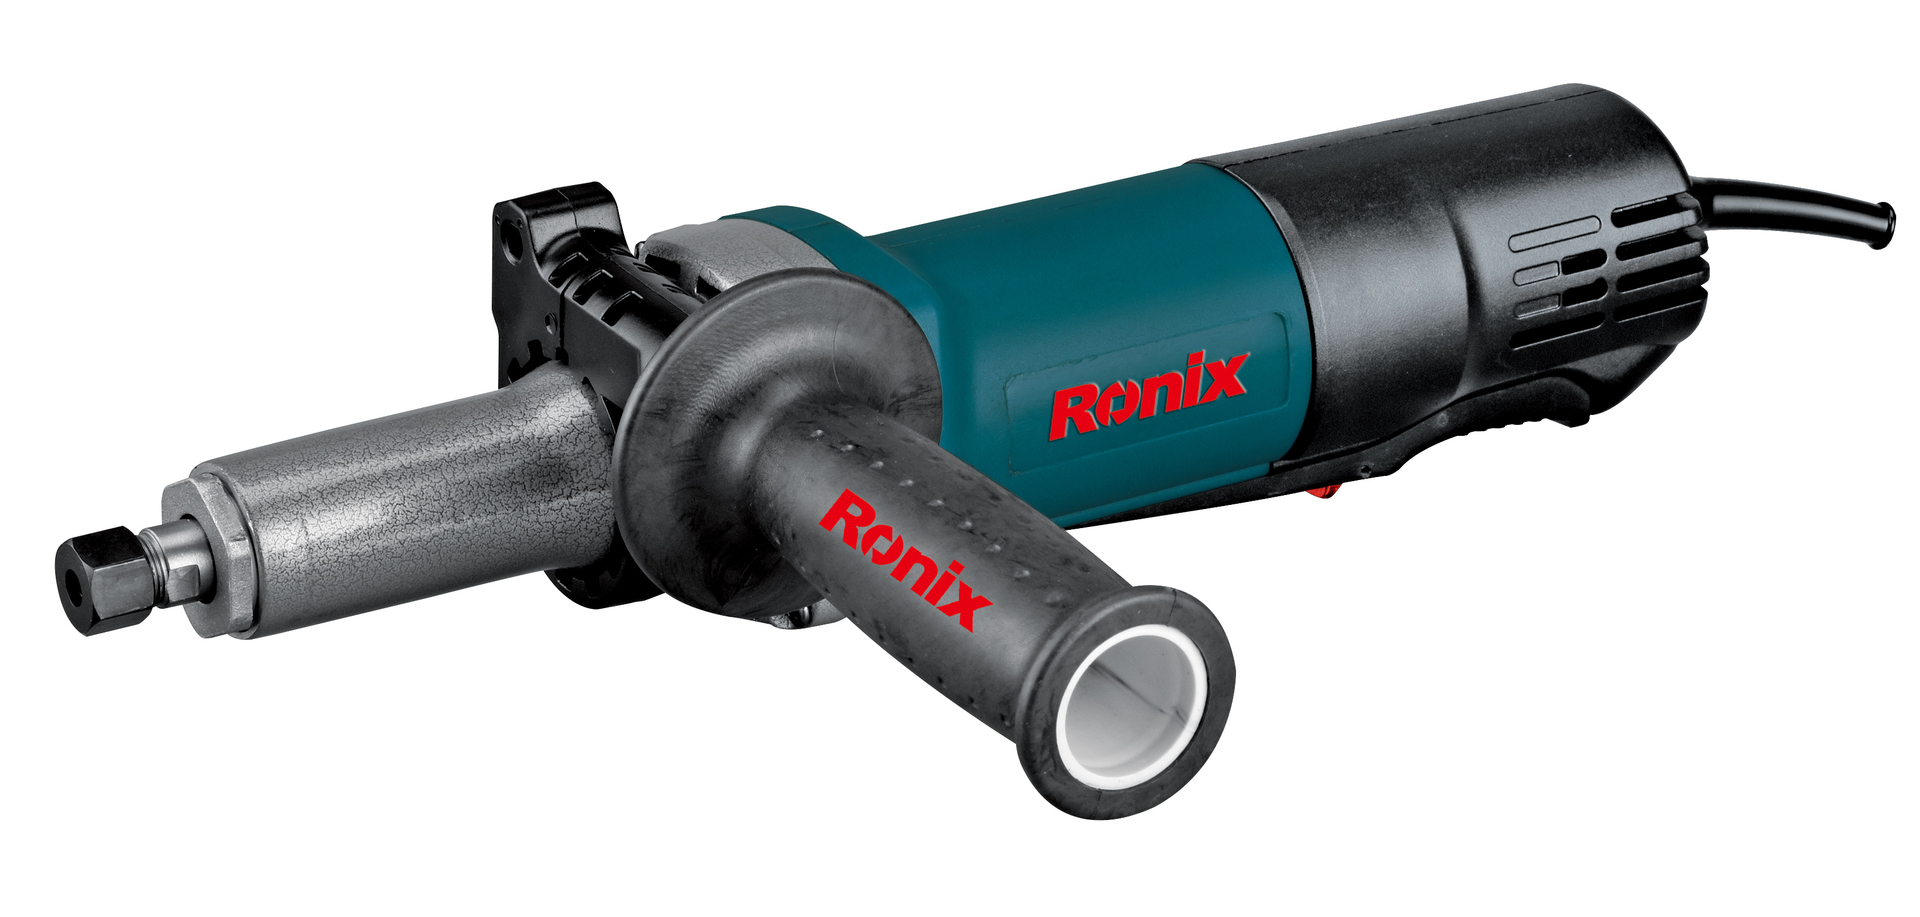 Ronix Tool High-quality angle grinder cutting suppliers for cutting metal